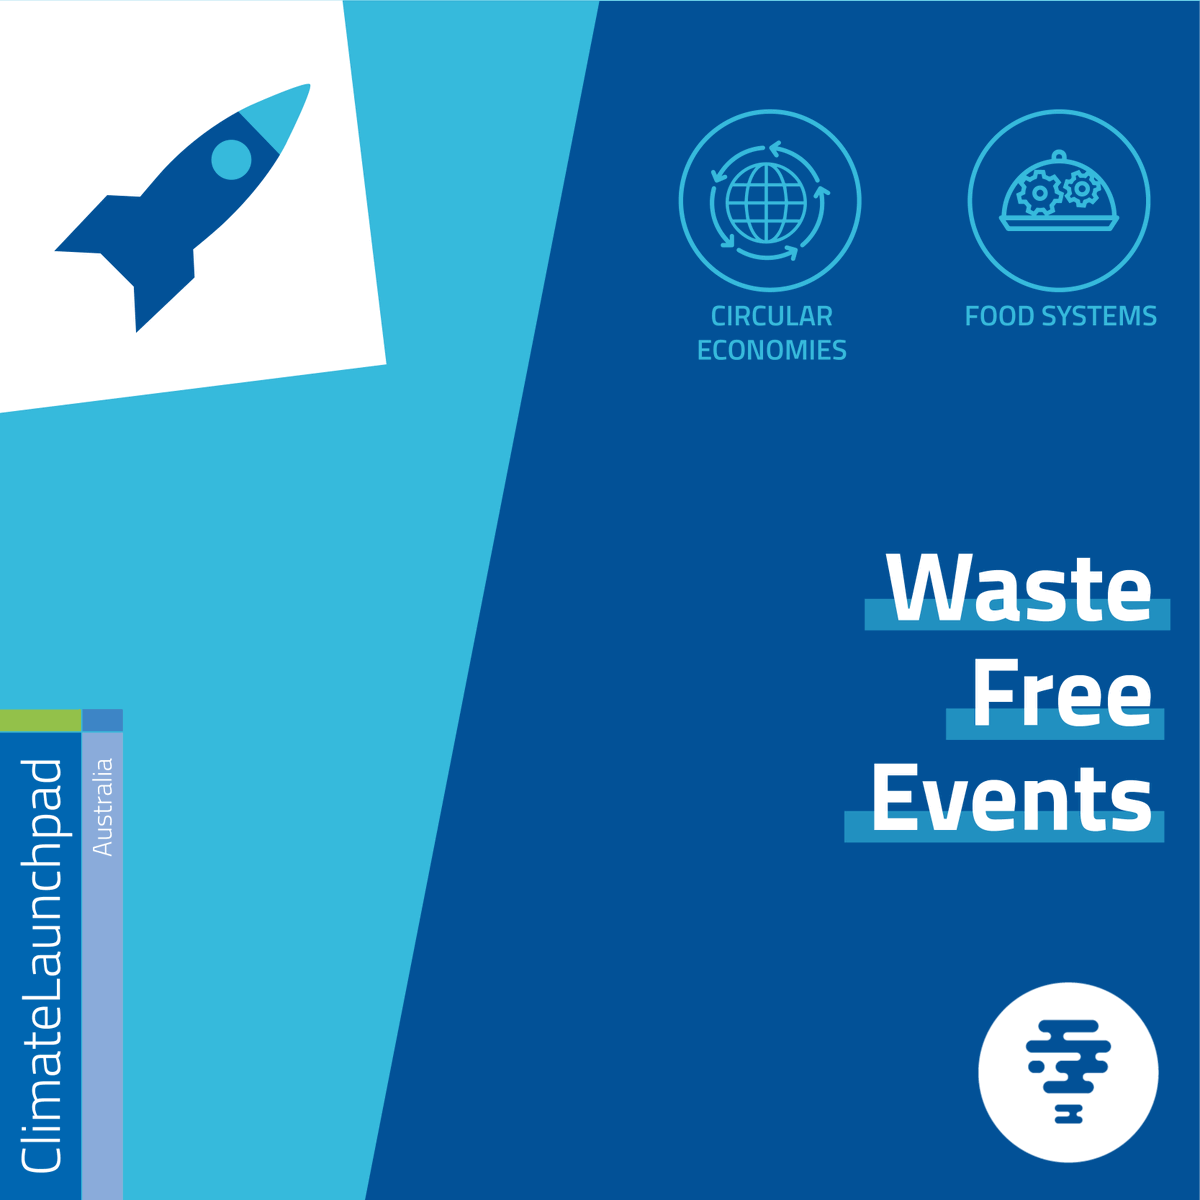 We are delighted to introduce our @ClimateLaunch 2023 Australian Finalists! Waste Free Events was created to support and guide schools and community groups to run events with as little waste as possible. Watch our #CLP23 National Finals @ NEXUS! victoriancleantech.org.au/nexus